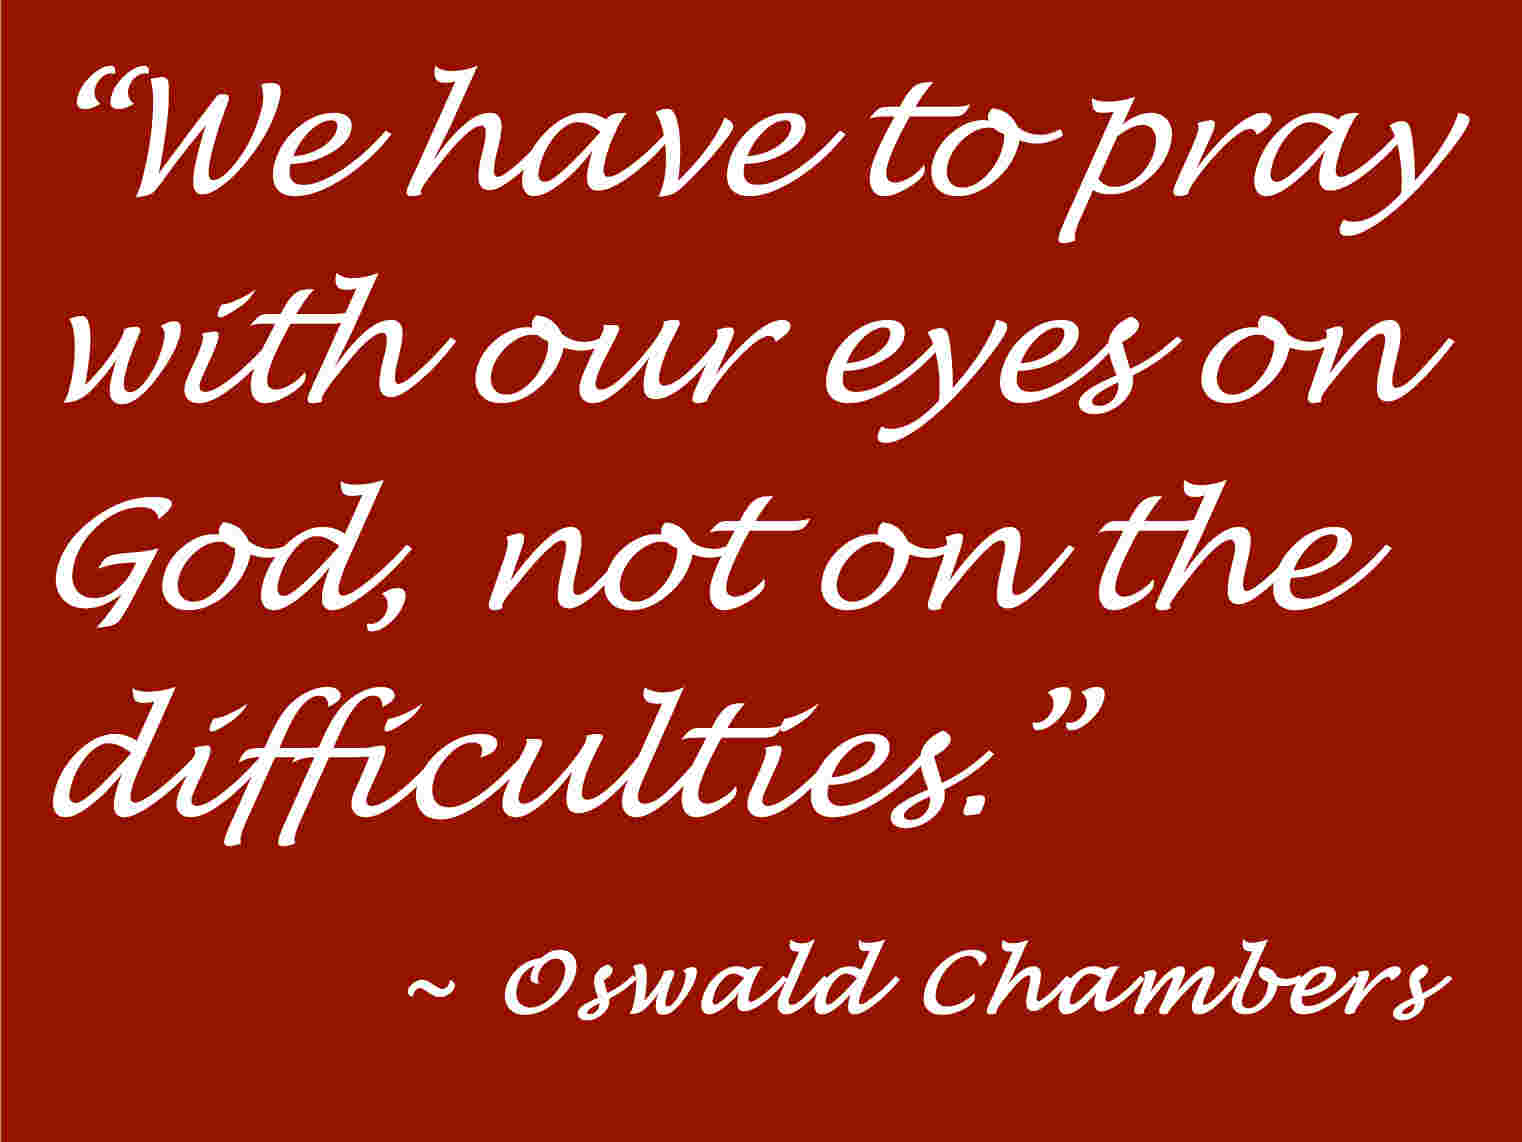 We have to pray with our eyes on god, not on the difficulties. Oswald Chambers